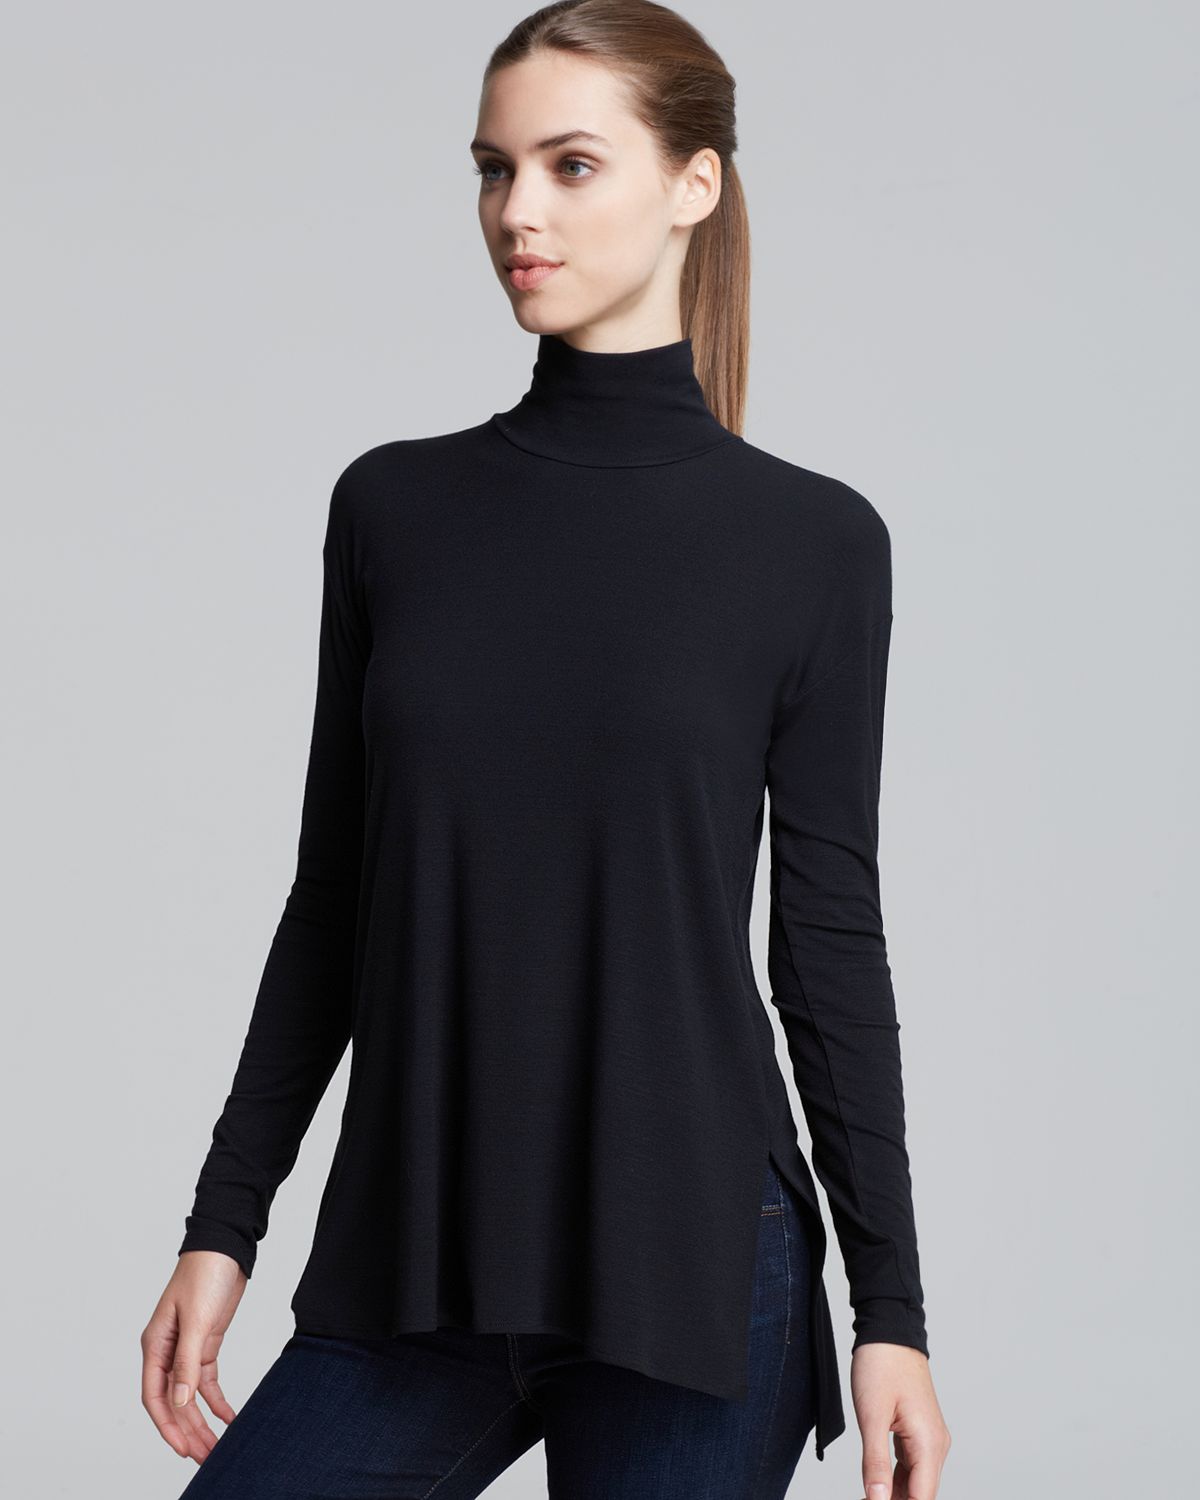 Lyst - Theory Nicey Knit Turtleneck Top in Black